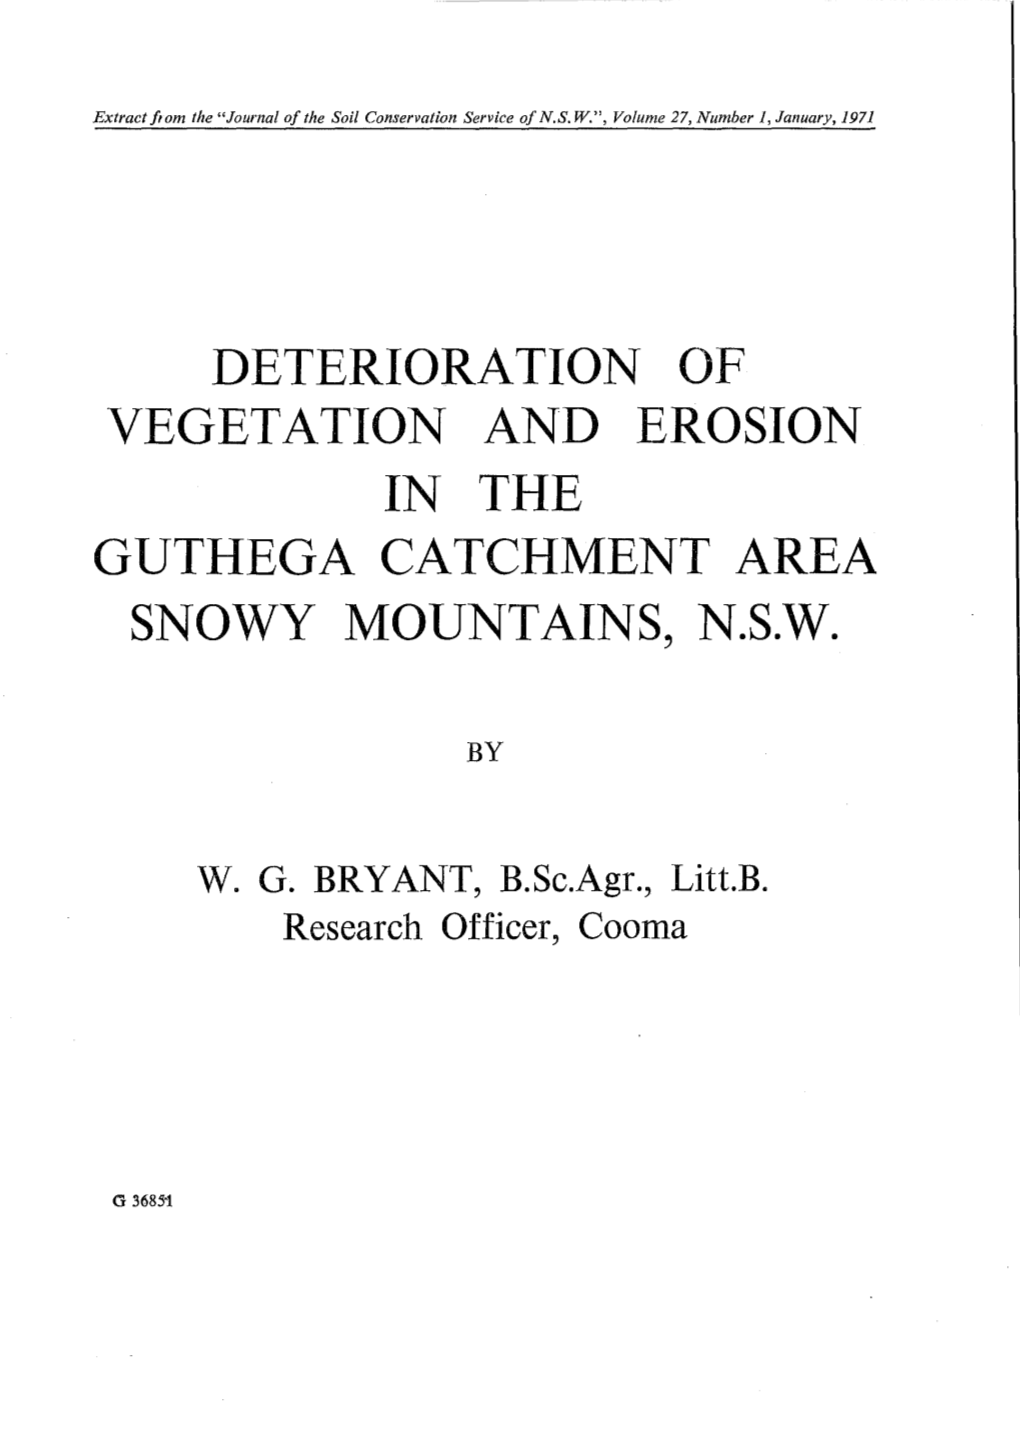 Deterioration of Vegetation and Erosion in the Guthega Catchment Area Snowy Mountains, N.S.W